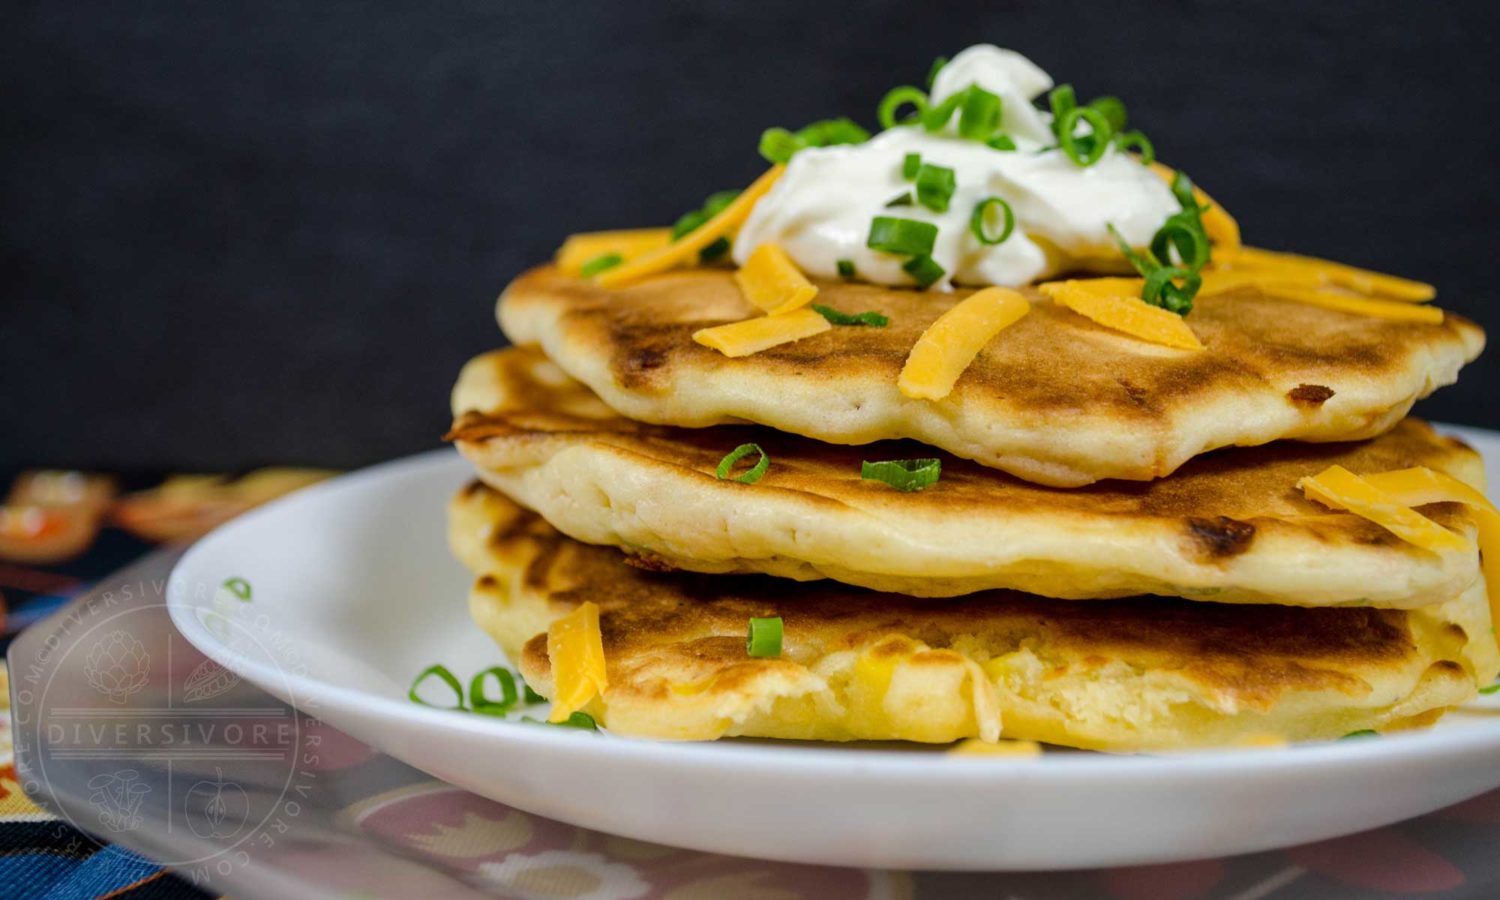 Bacon, cheddar, & chive savory pancakes topped with sour cream - Diversivore.com